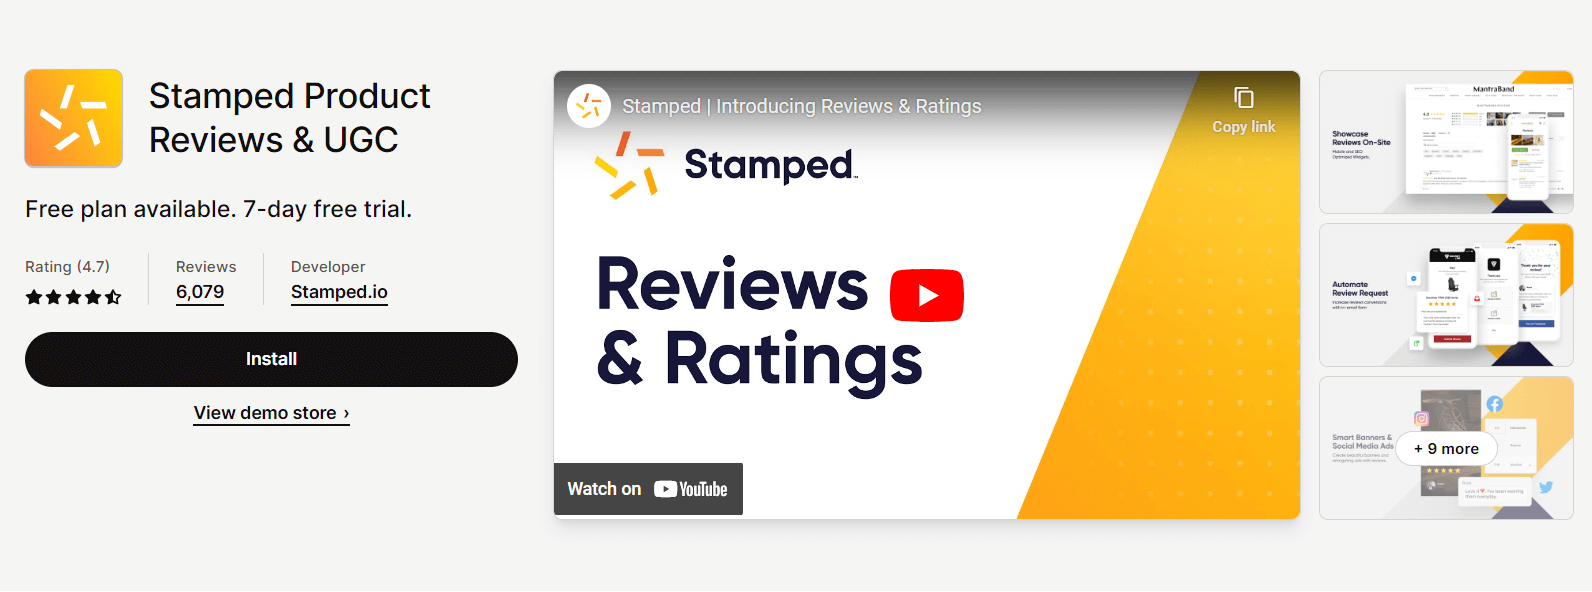 Shopify reviews page third-party apps - Stamped